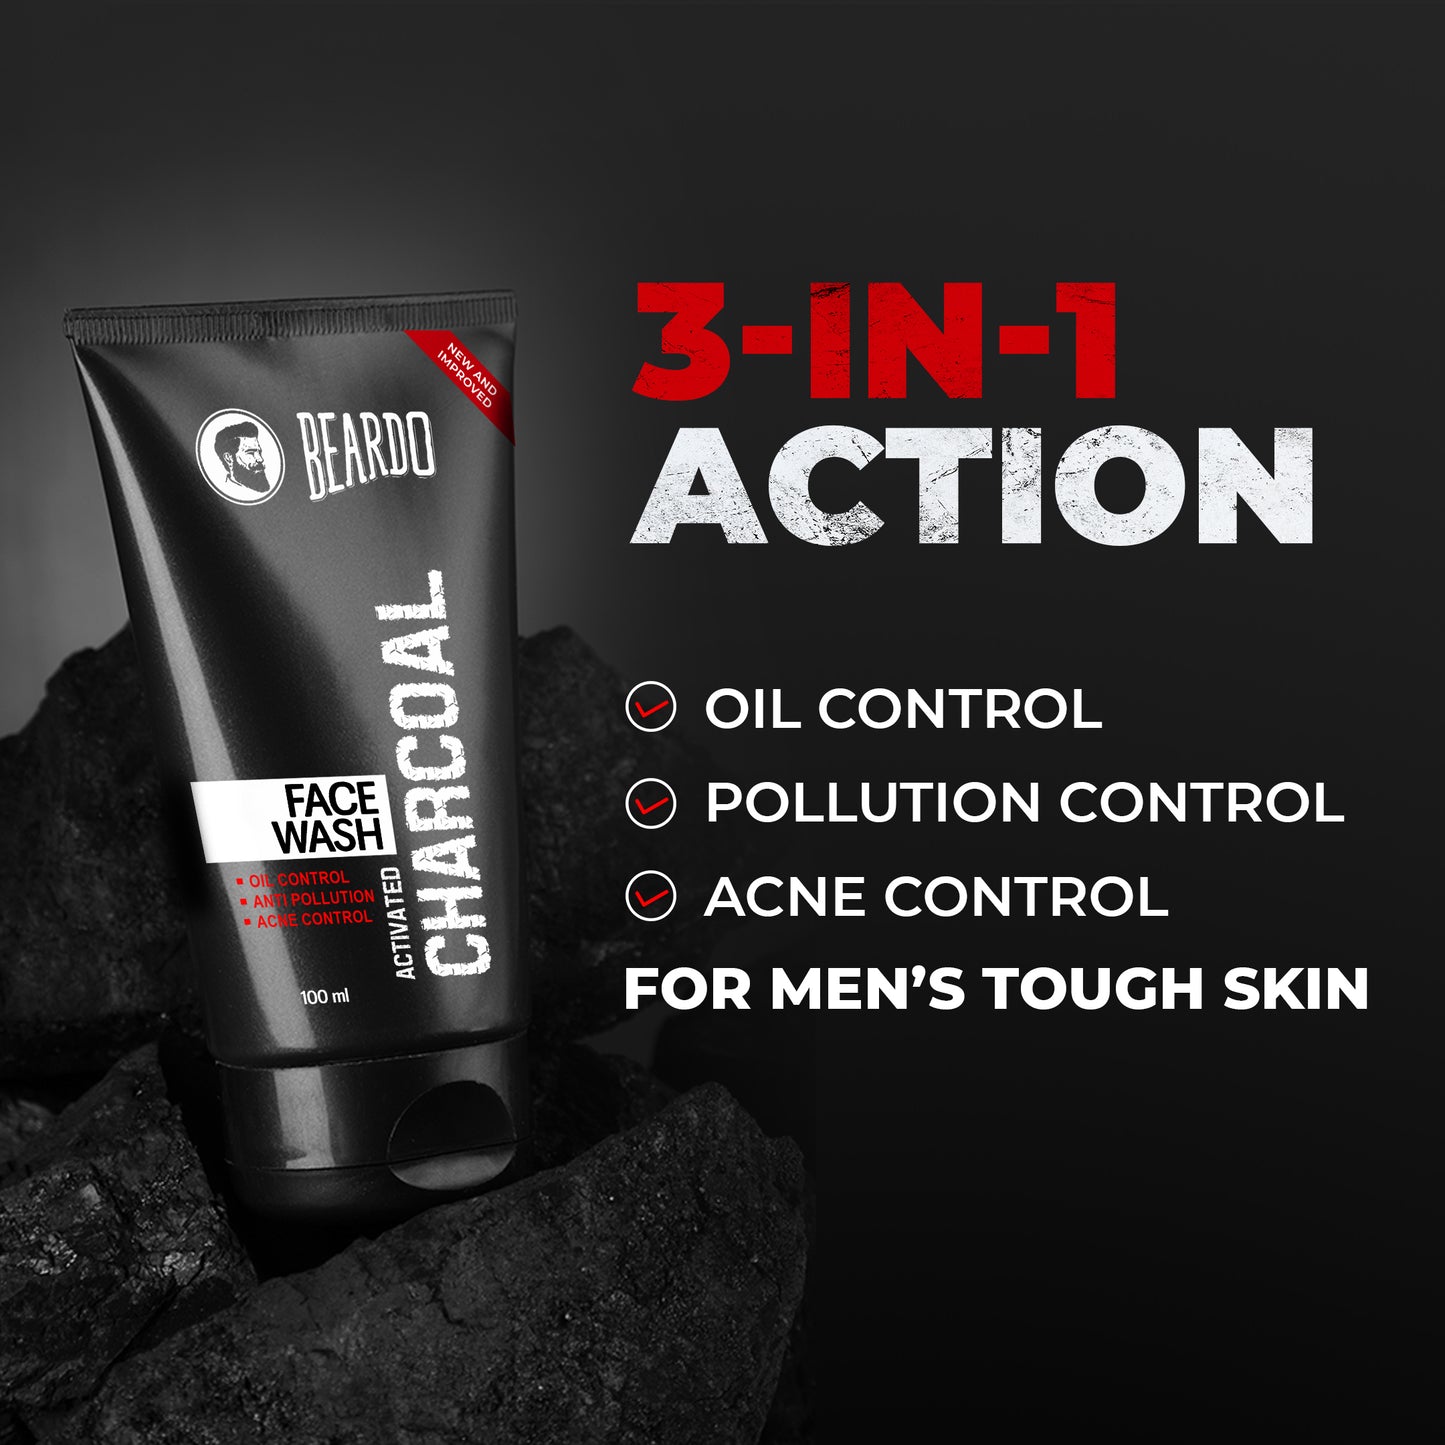 3 in 1 action, pollution control, oil control, acne control